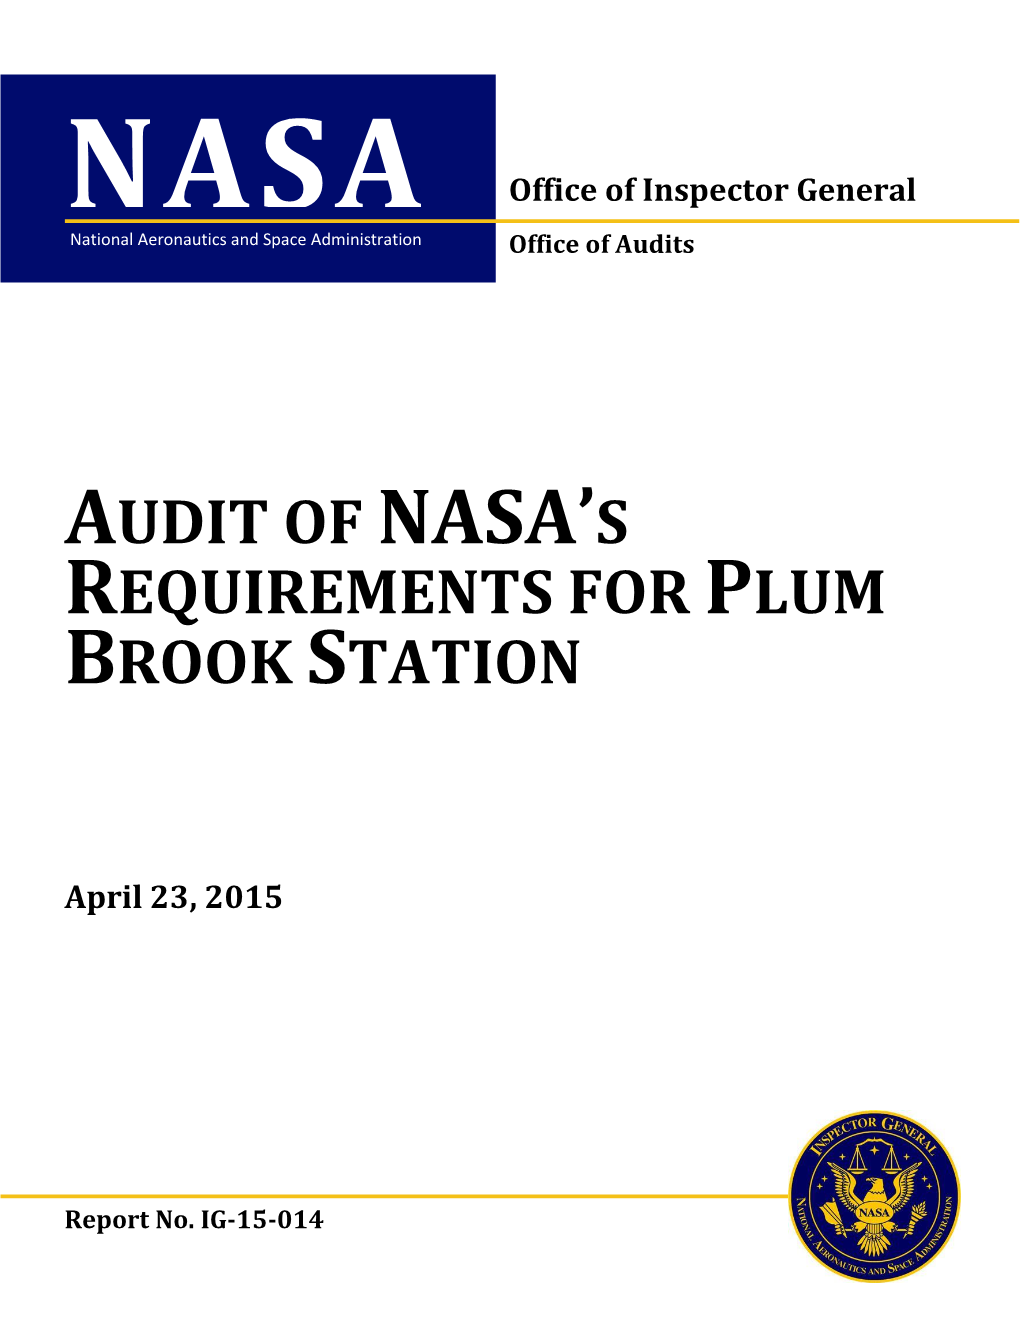 Audit of NASA's Requirements for Plum Brook Station (IG-15-014)